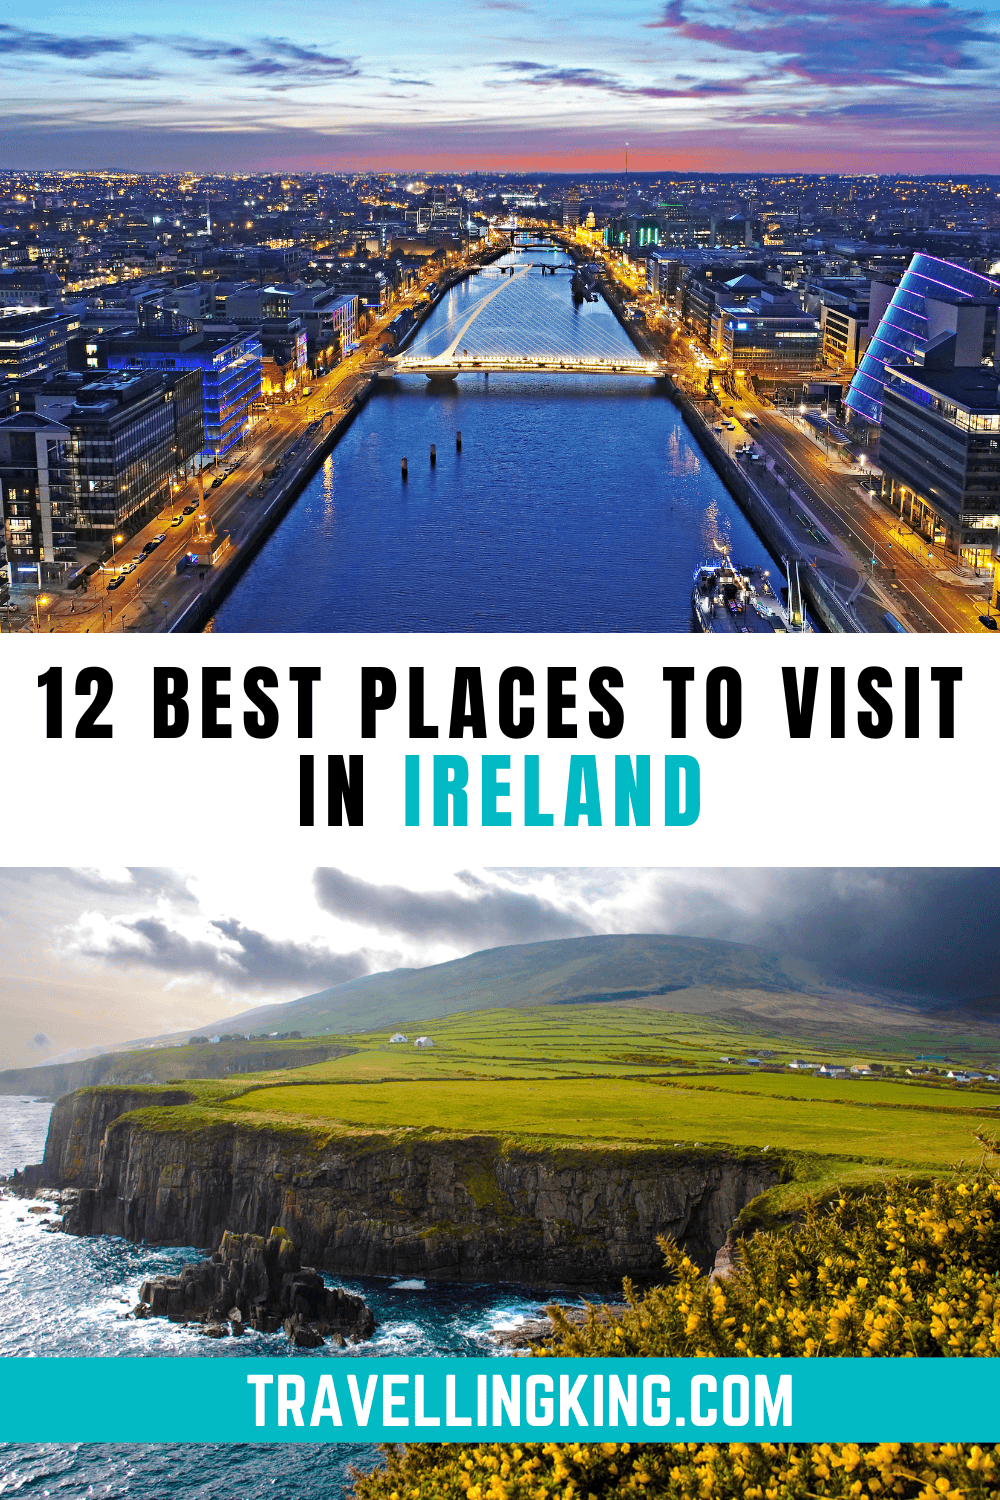 12 of the Best Places to Visit in Ireland